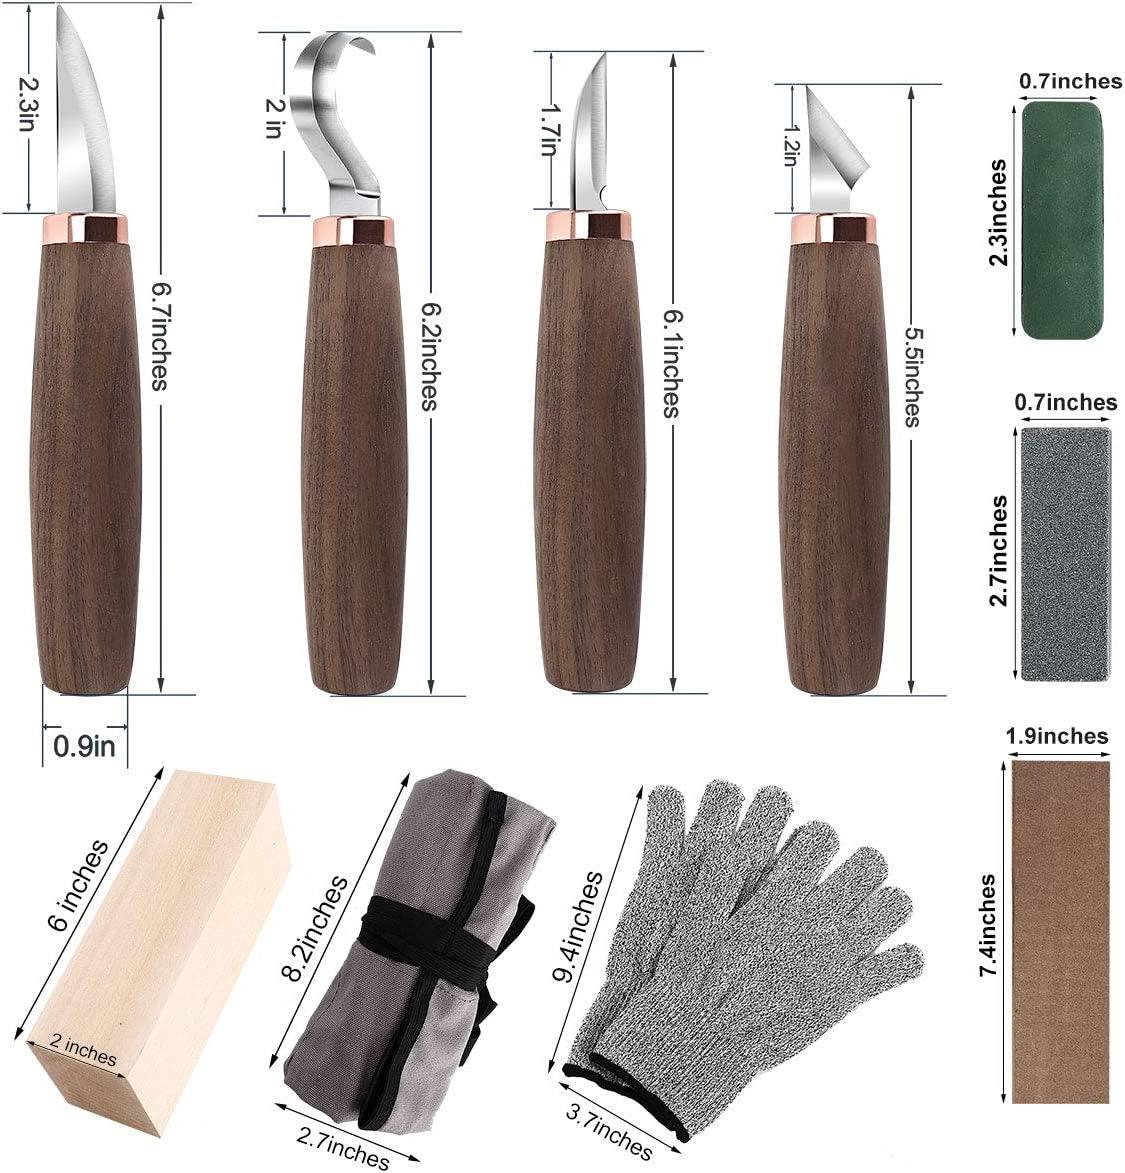 Wood Carving Tools Pack of 11 Wood Knife,Whittling Knife,Hook Knife,Polishing Compound,Sharpening Stone,Cut Resistant Gloves - WoodArtSupply